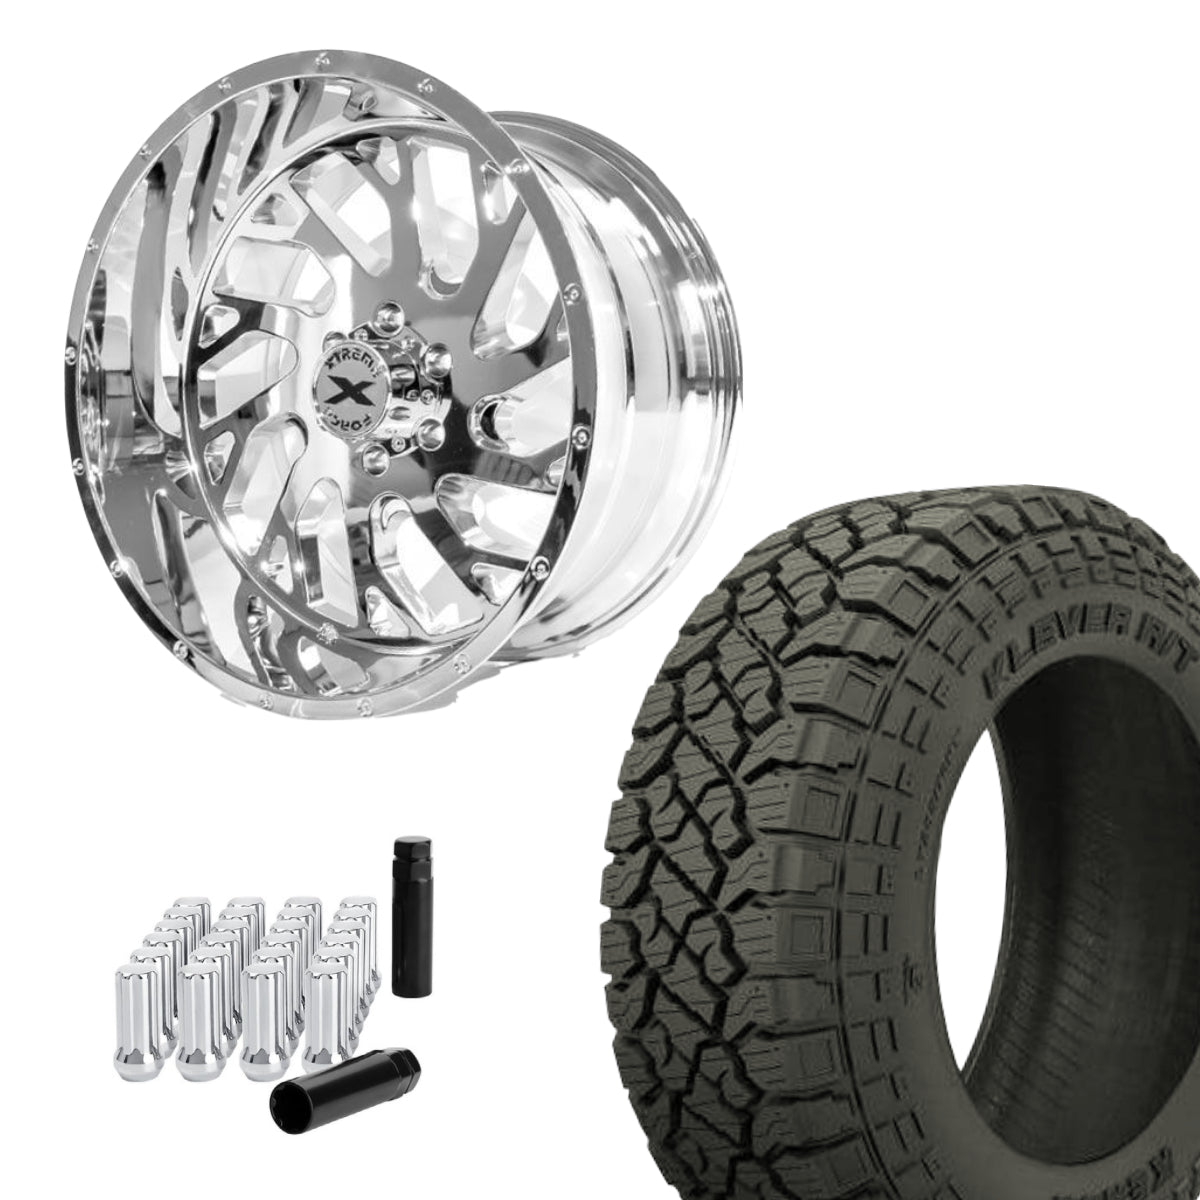 Xtreme Force XF-8 22x12 -44 6x135 Chrome & 35x12.50R22 Kenda Klever RT KR601 FORD LIFTED